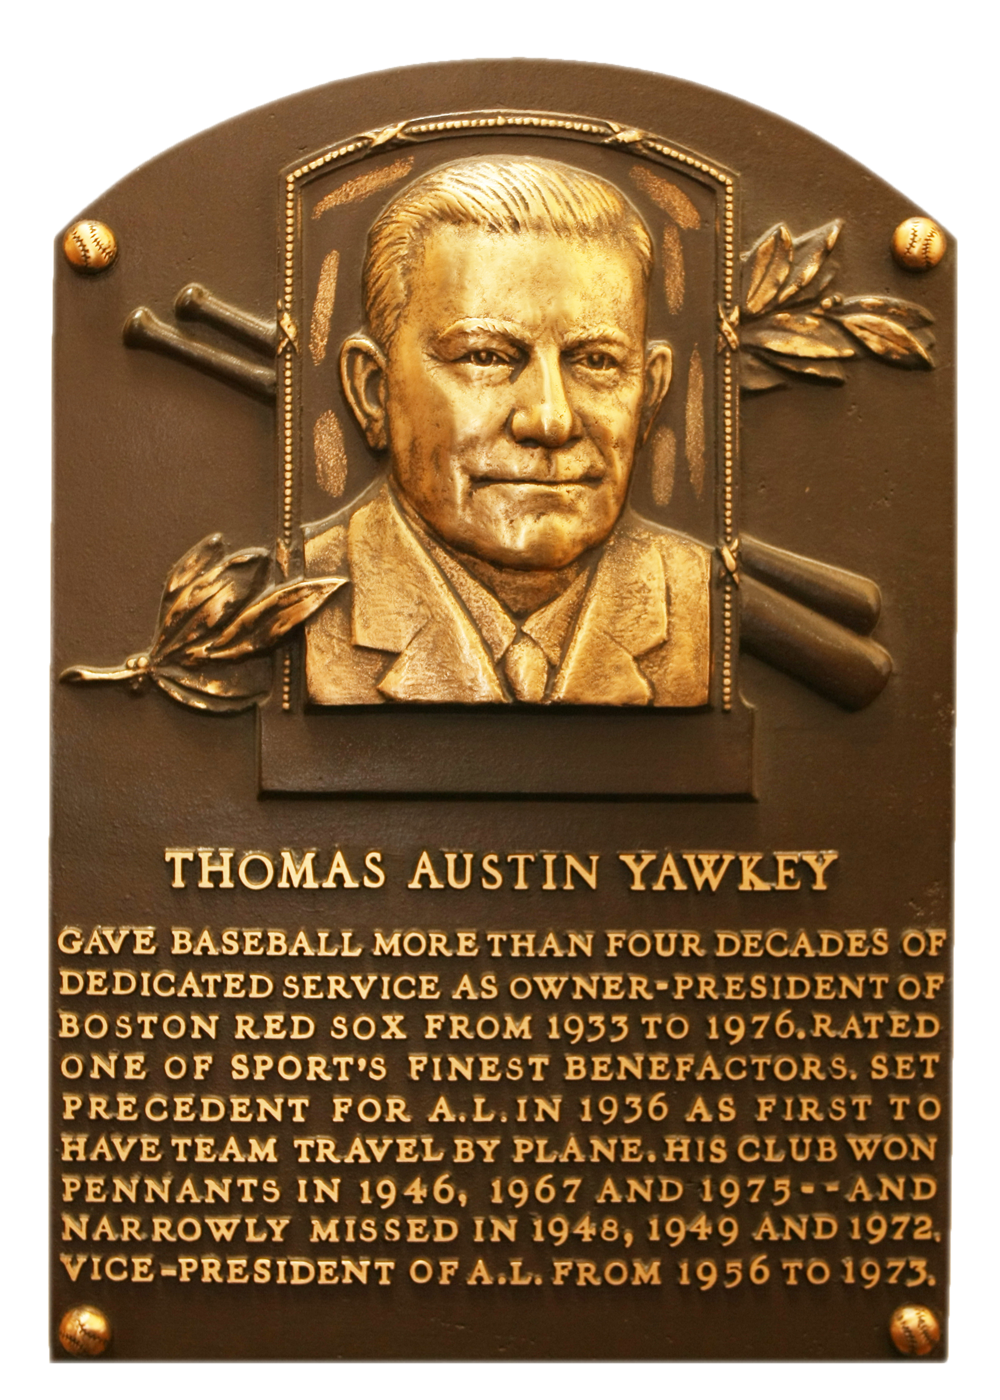 Tom Yawkey Hall of Fame plaque